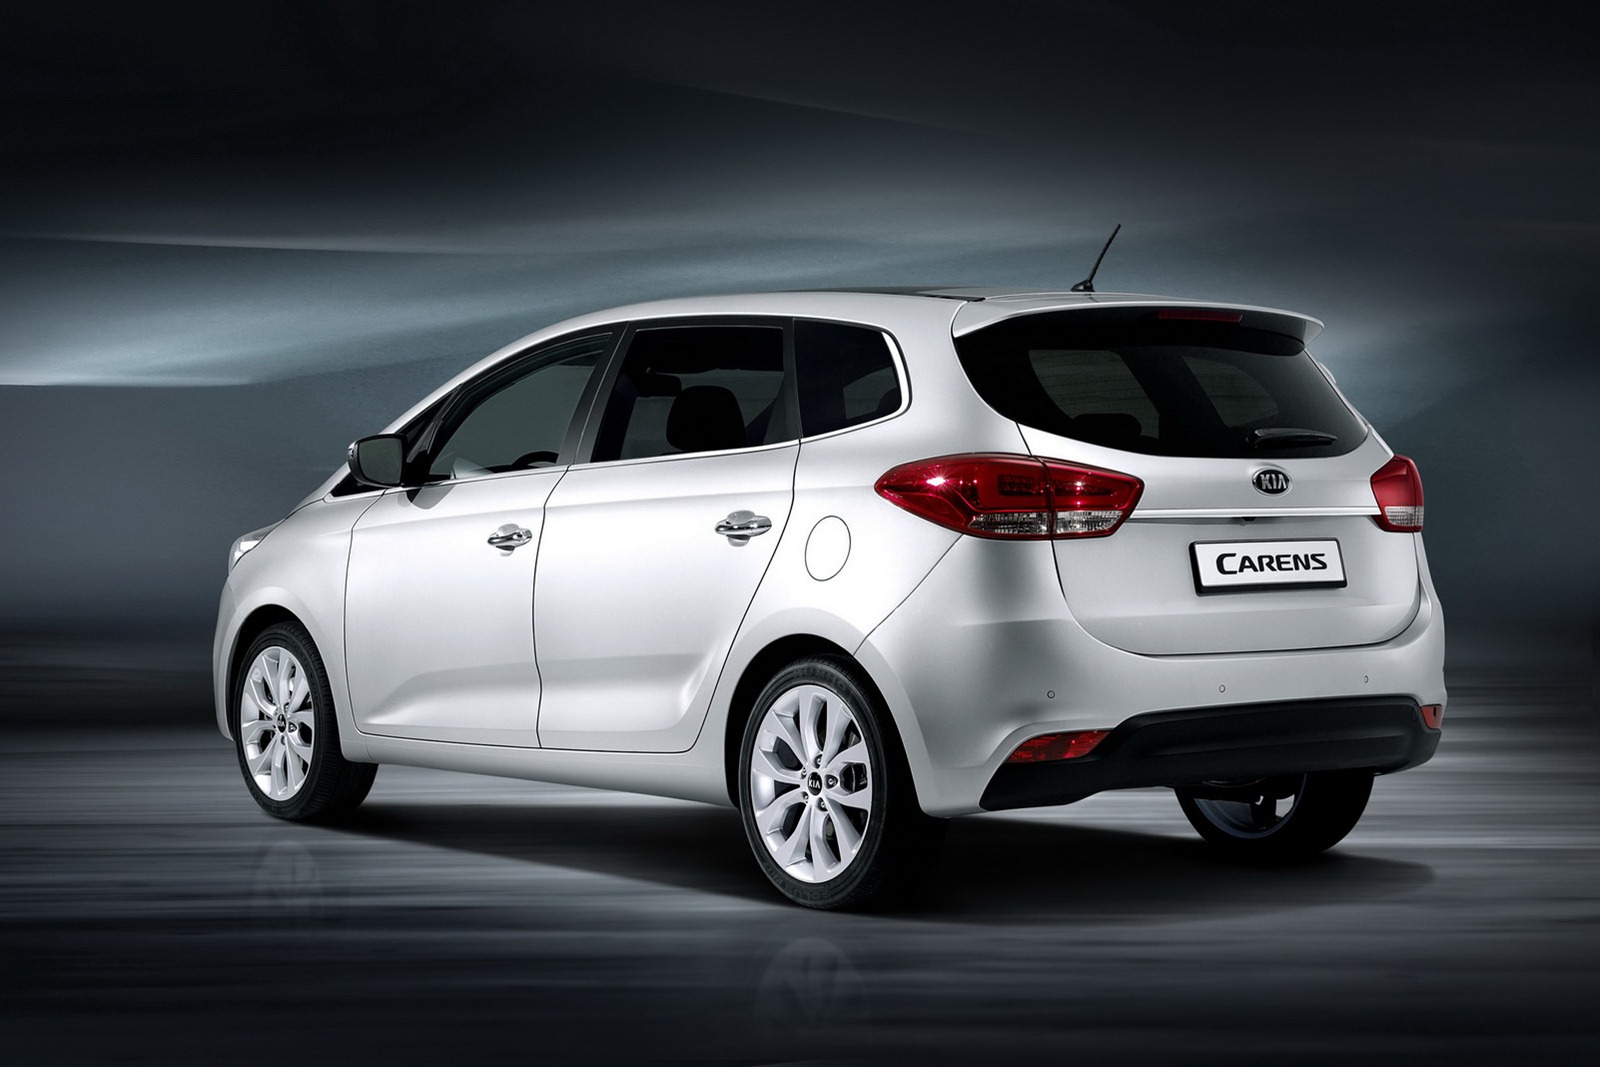 Kia Carens 2014 Review, Amazing Pictures and Images